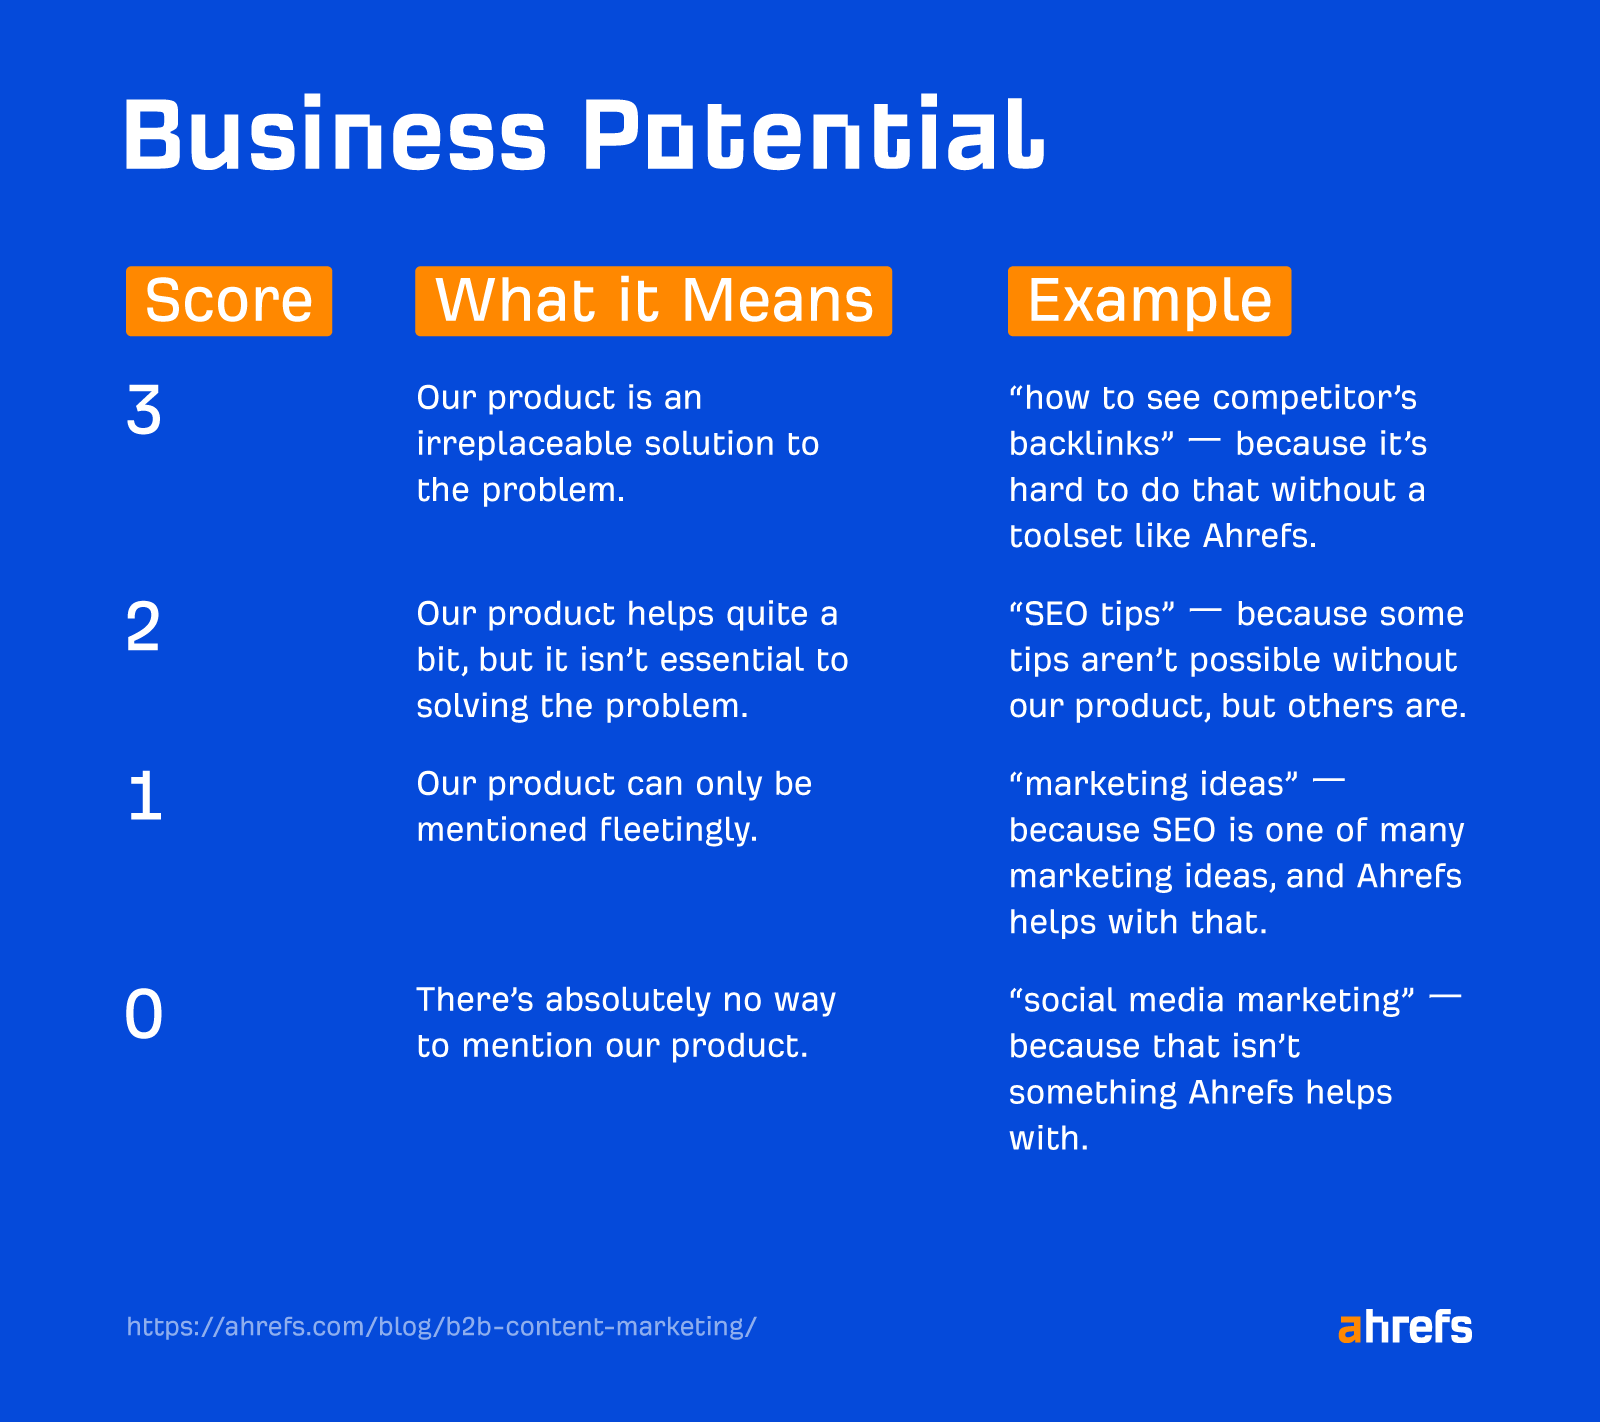 Table showing how business potential scores are determined